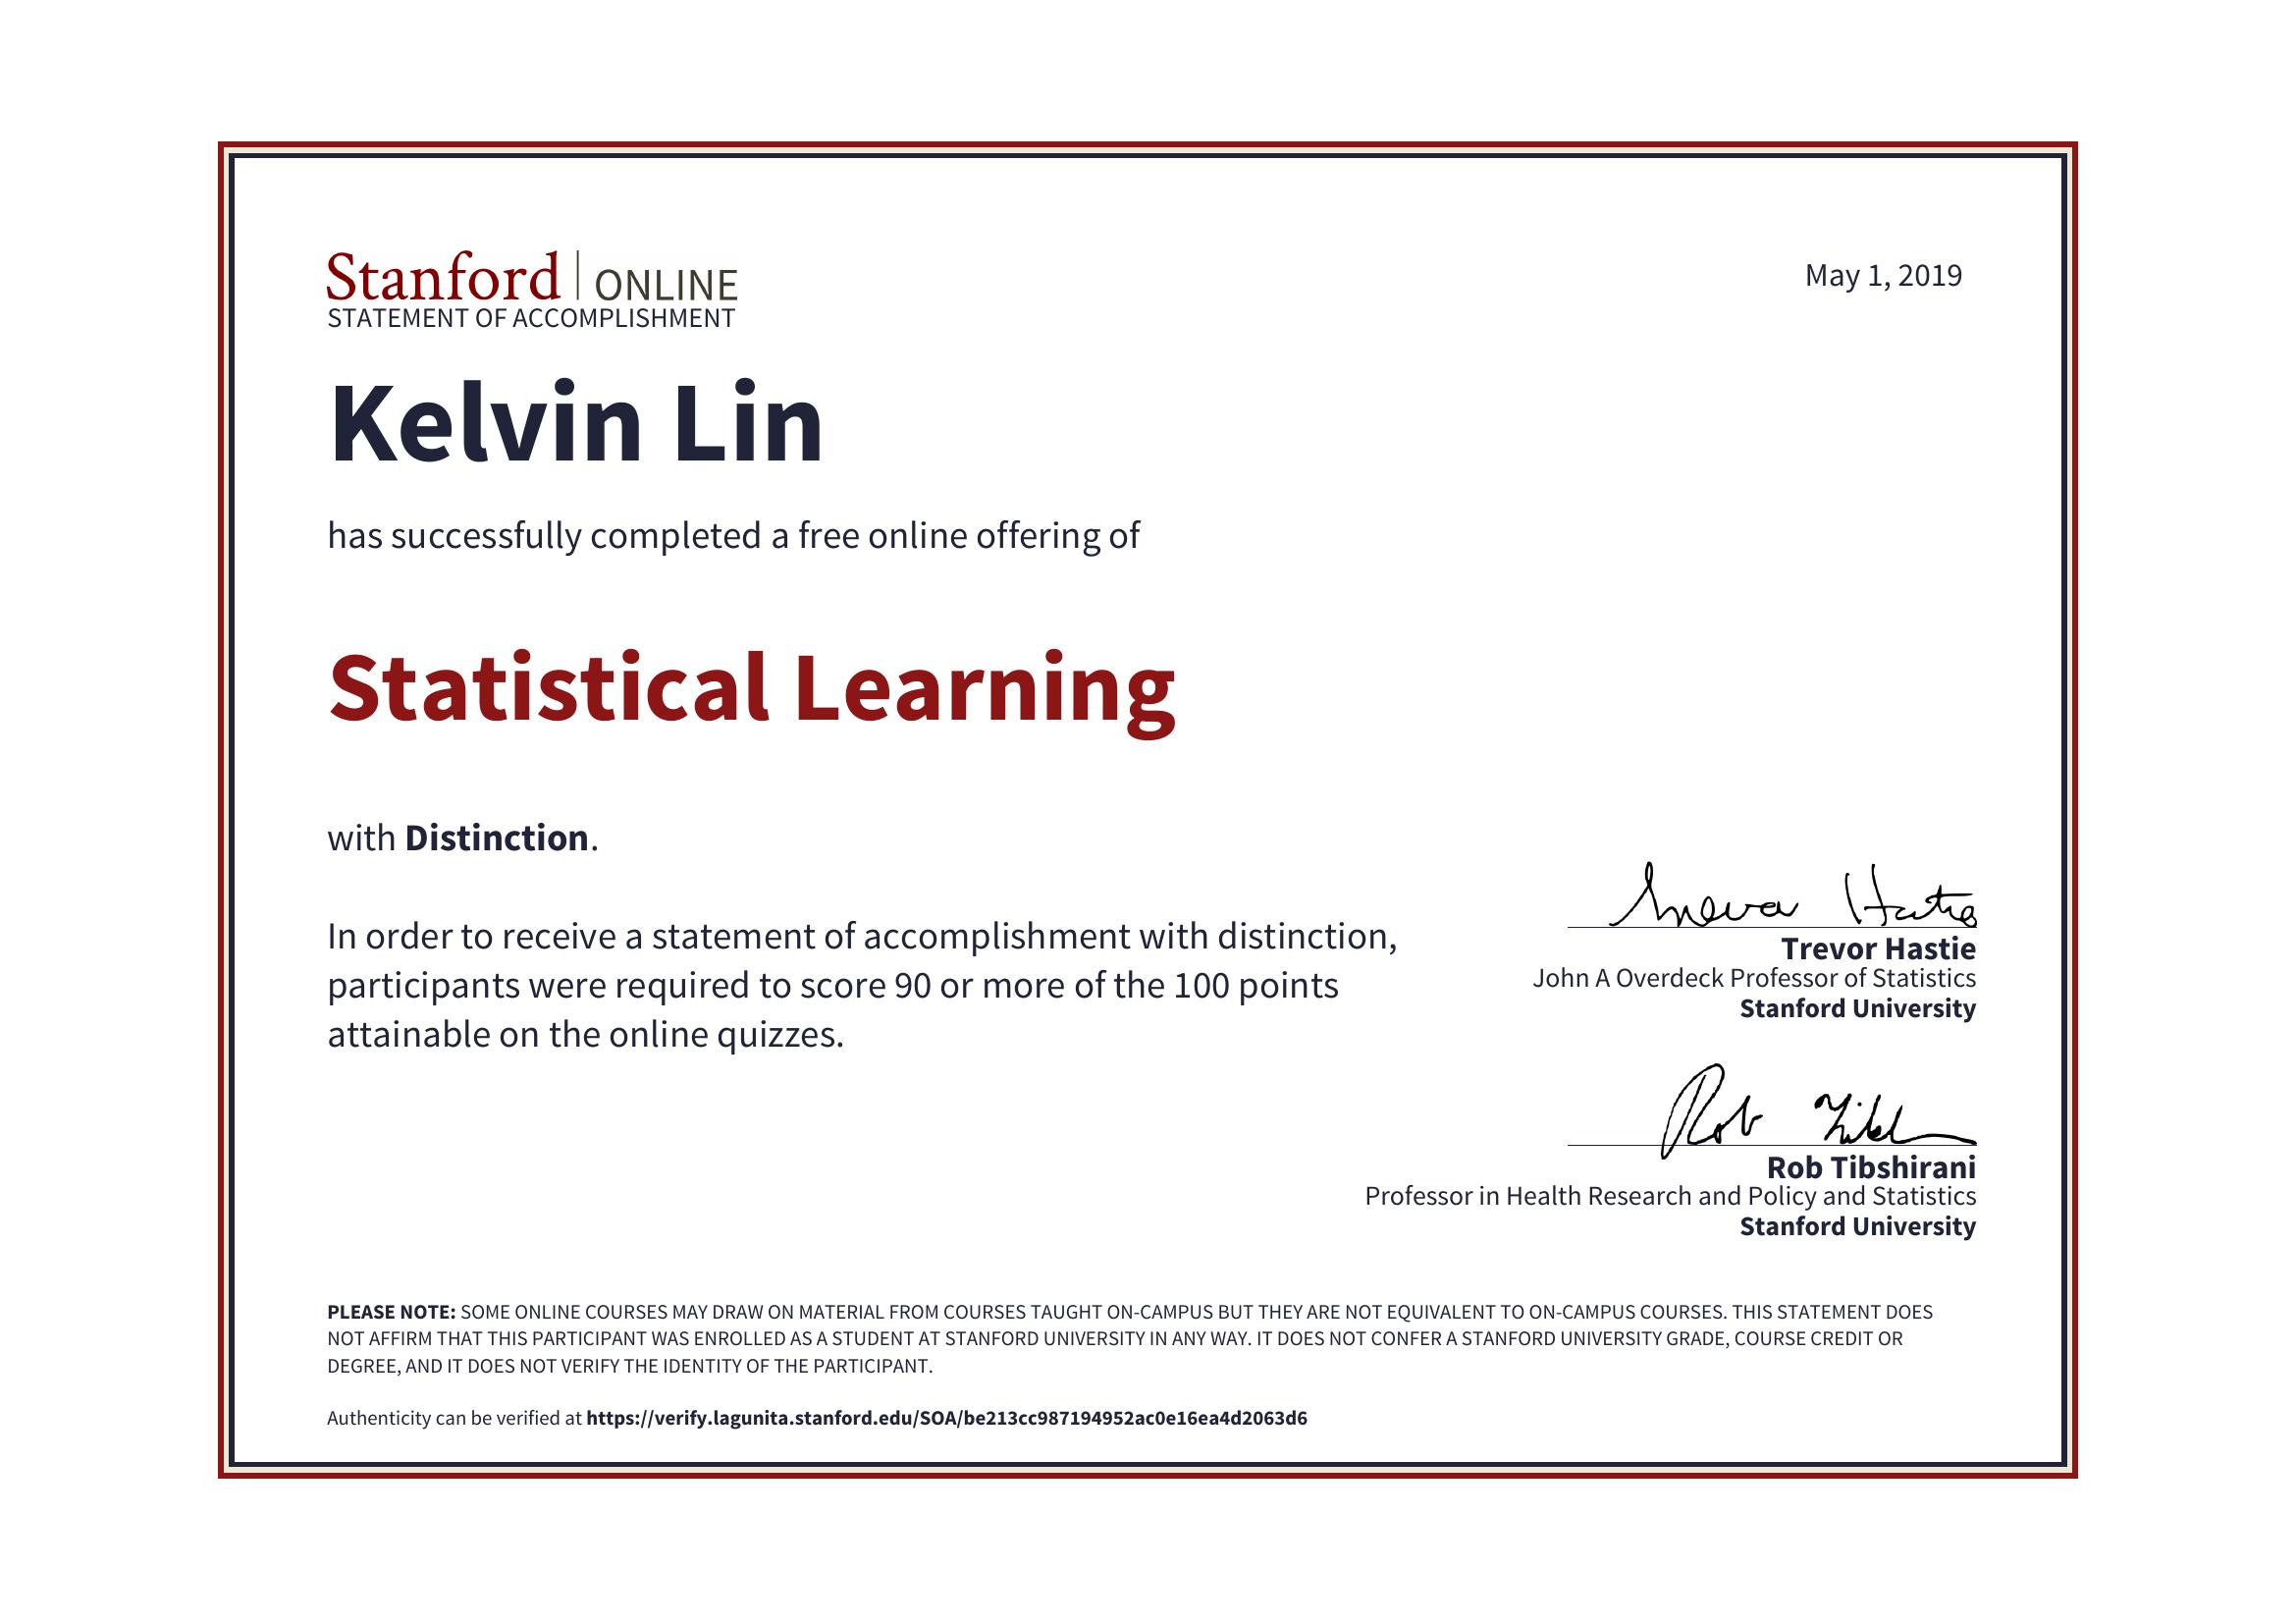 Kelvin Lin's Stanford Lagunita's Statistical Learning Statement of Accomplishment with Distinction